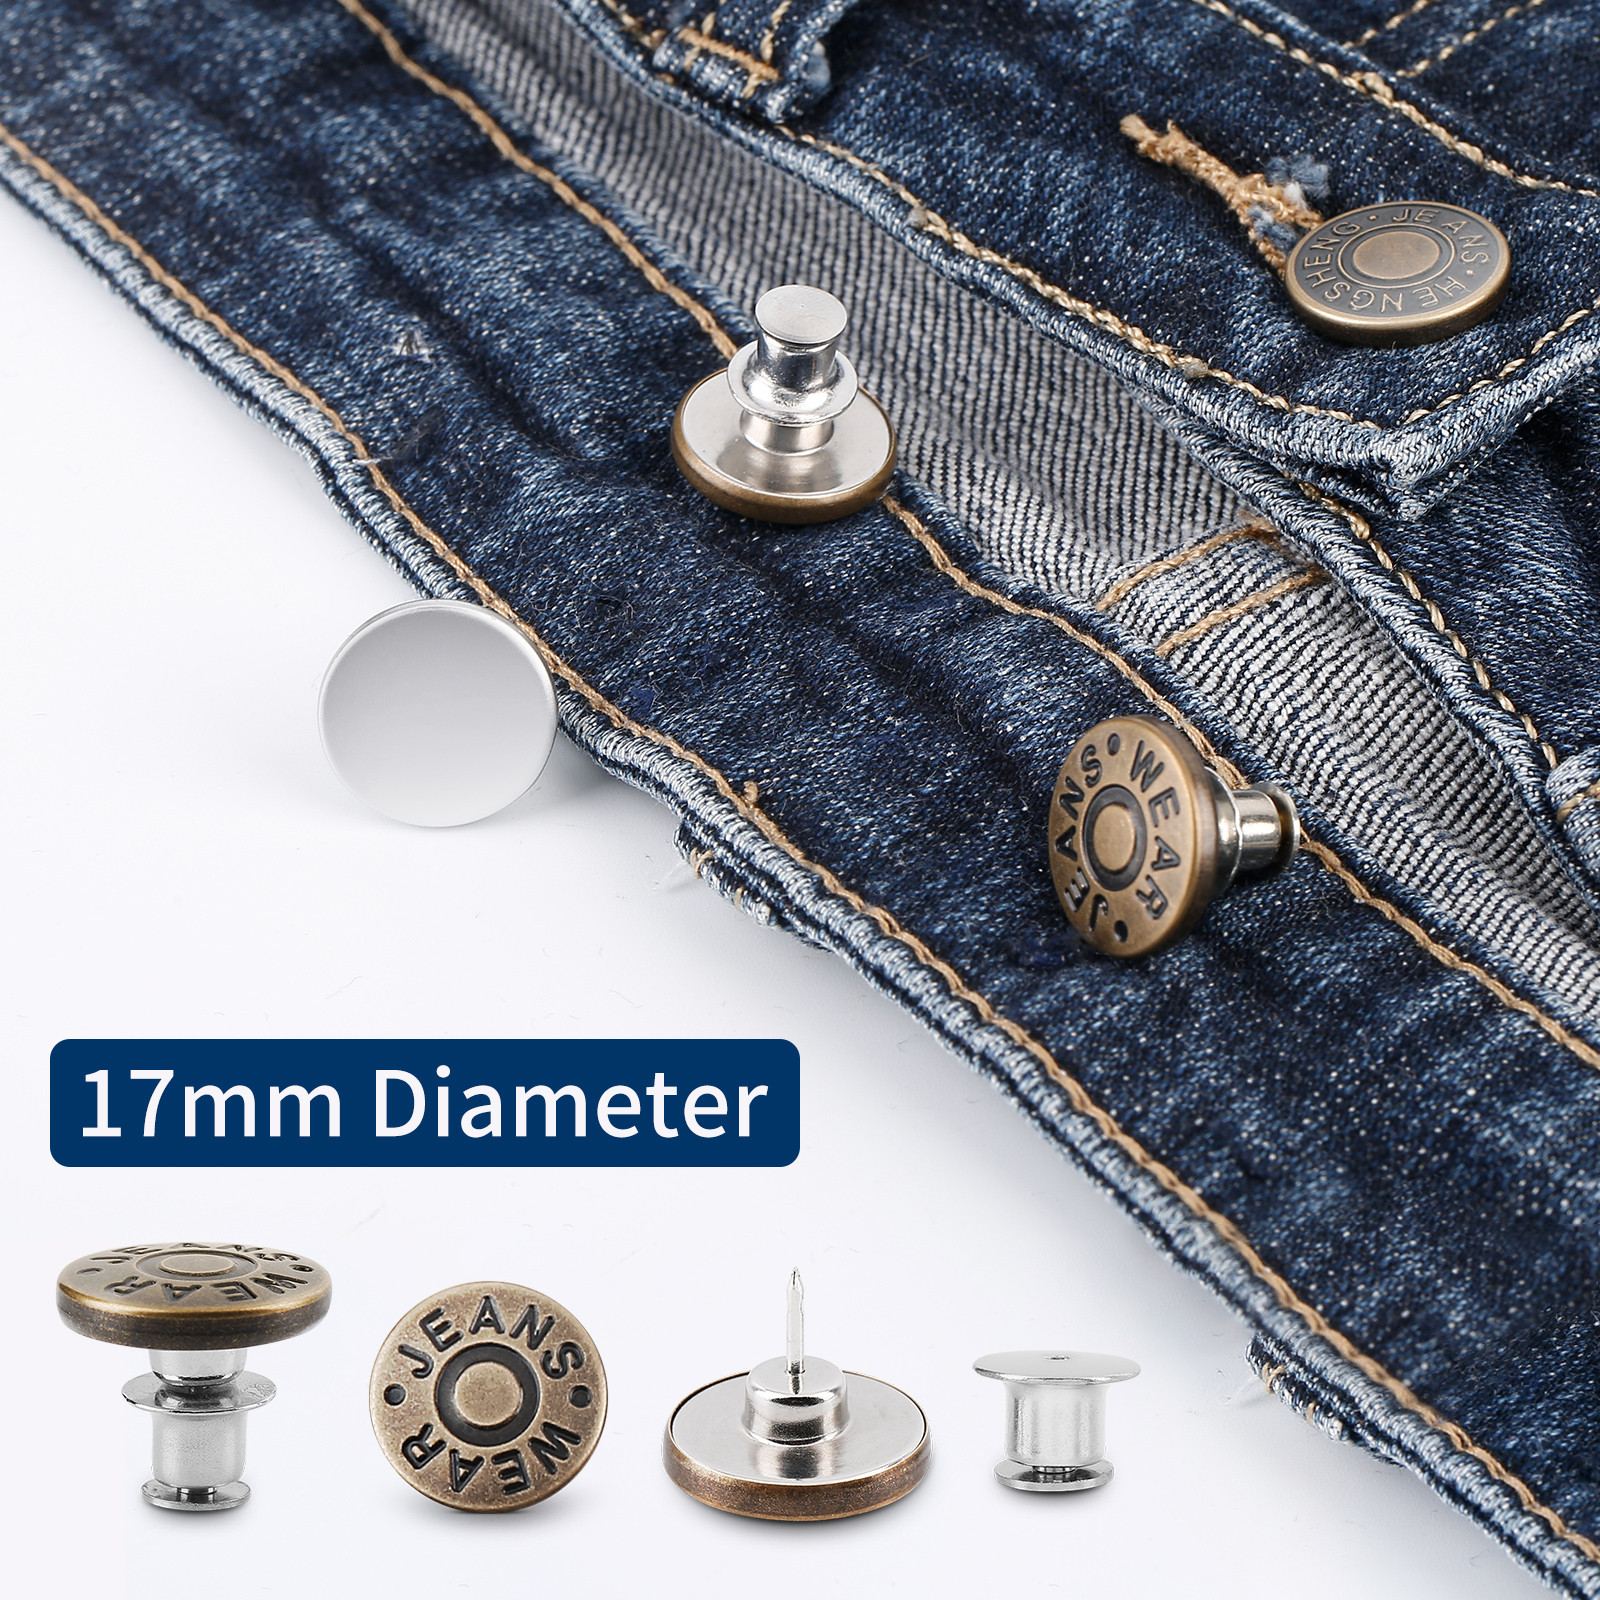 Kaqulec Jean Button Pins Replacement for Pants, No Sew and No Tools ...